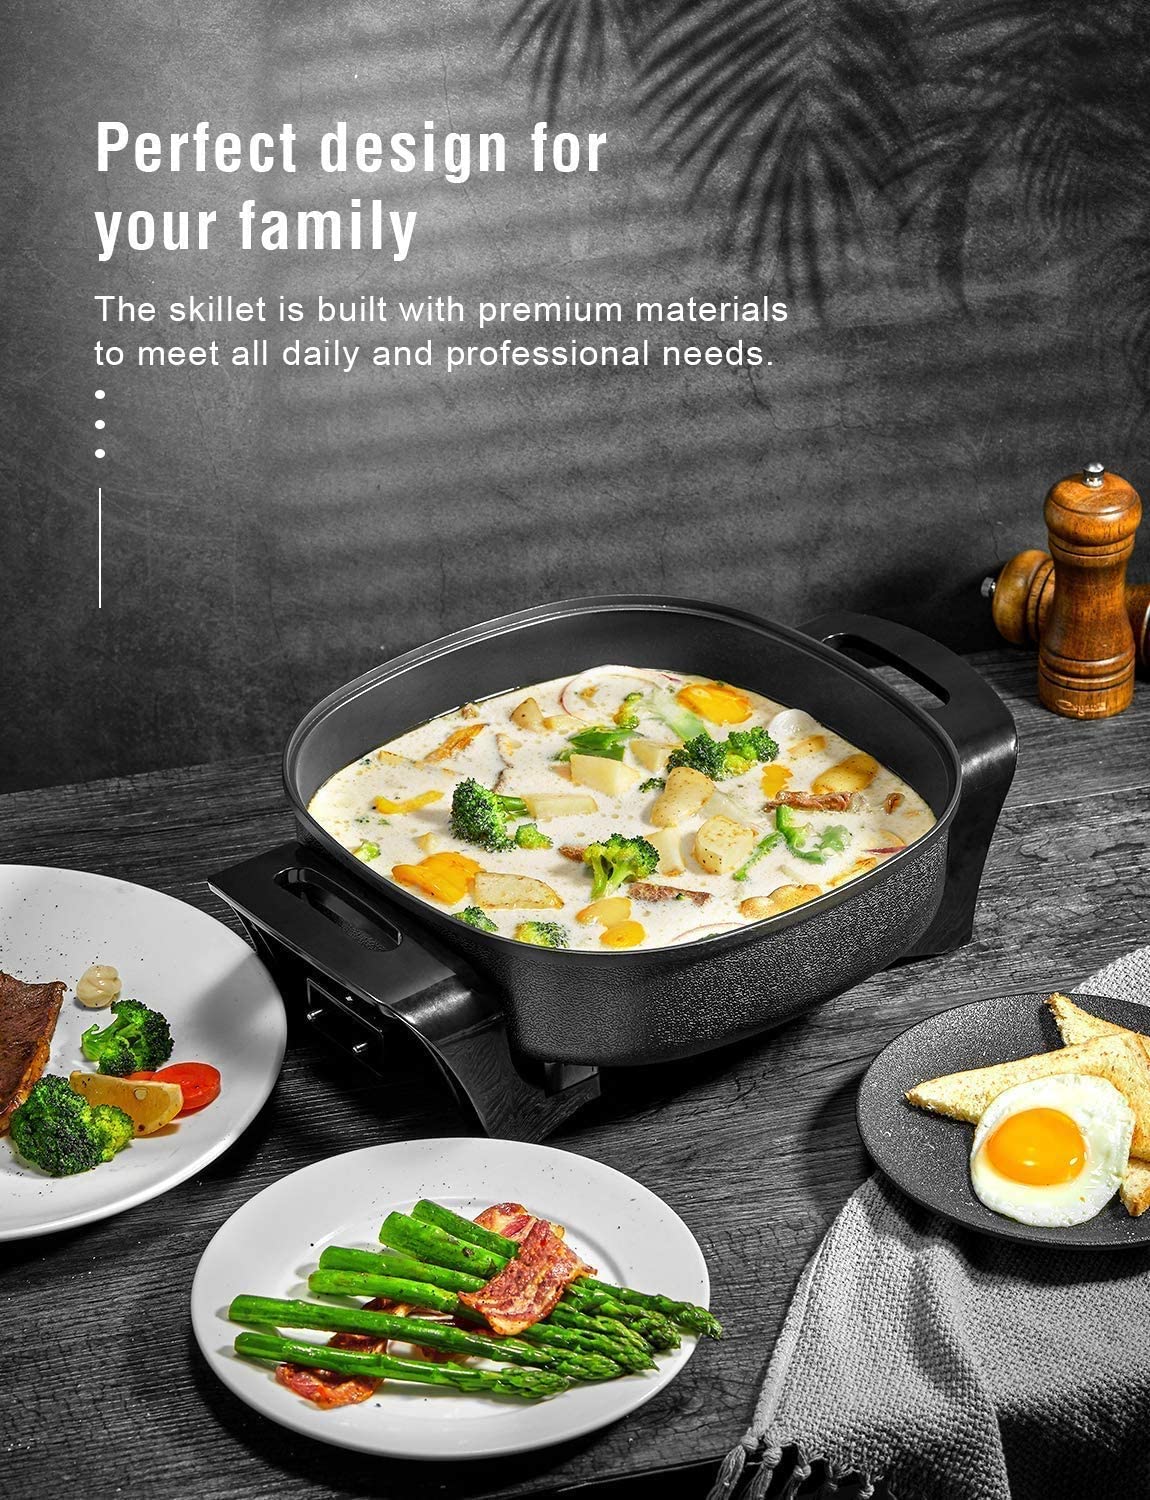 Decen Electric Skillet Non Stick Electric Frying Pan with Standing Tem –  AICOOK